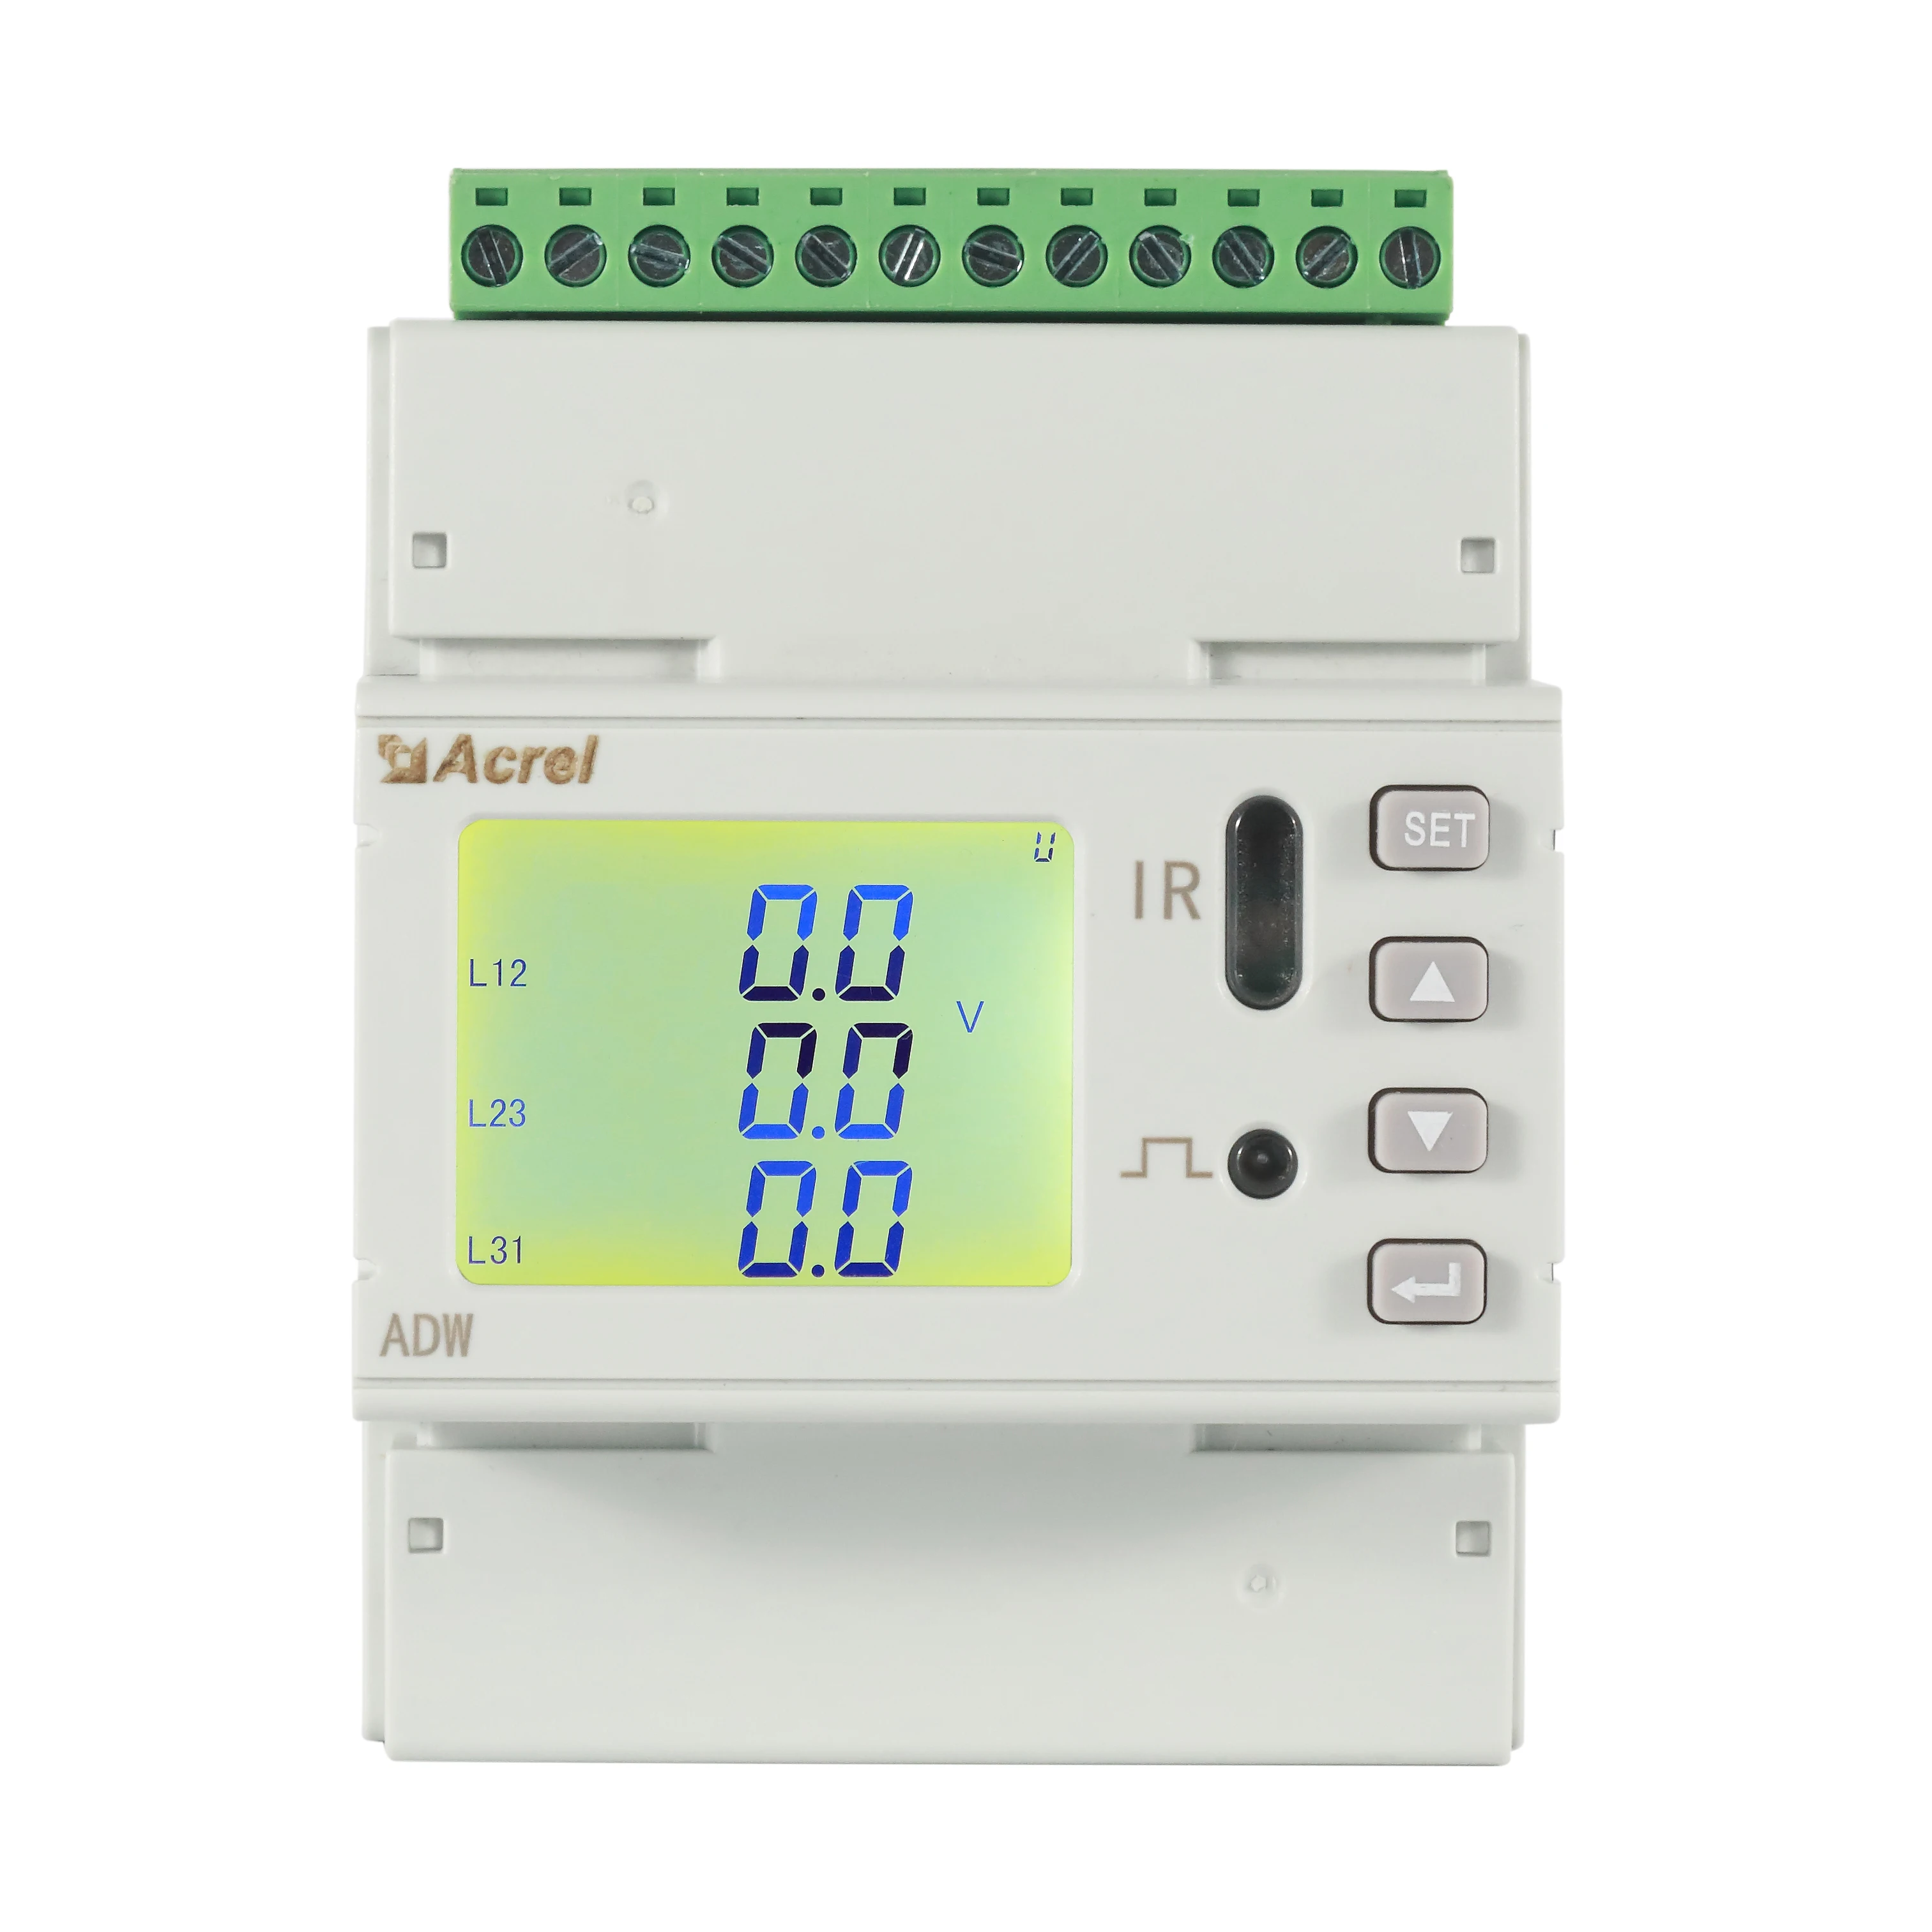 

Acrel 2DI/2DO Multi-Function Max 4-Channel 3-Phase Kwh Power Monitoring Smart Energy Meter Rs485 Modbus-RTU